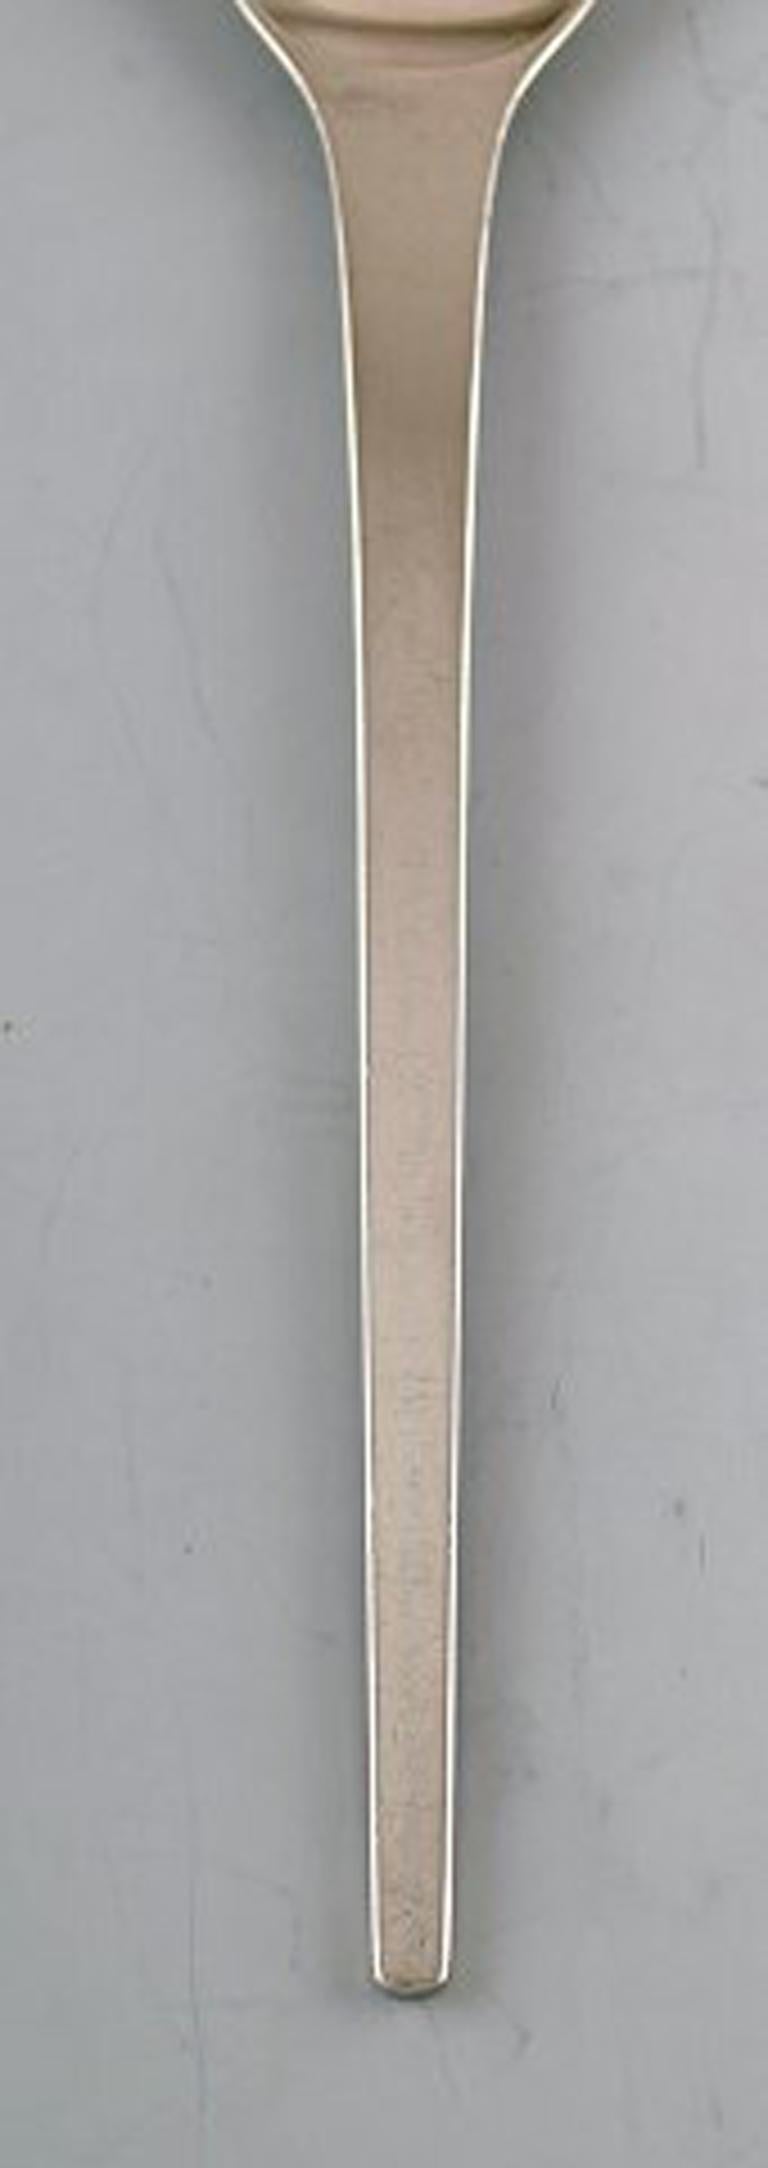 Rare Georg Jensen Caravel ice tea spoon / cocktail spoon in Sterling silver.
The elegant and timeless Caravel cutlery was designed by Henning Koppel in 1957.
Measures: 19.5 cm.
Stamped.
In very good condition.
Large selection of Caravel in